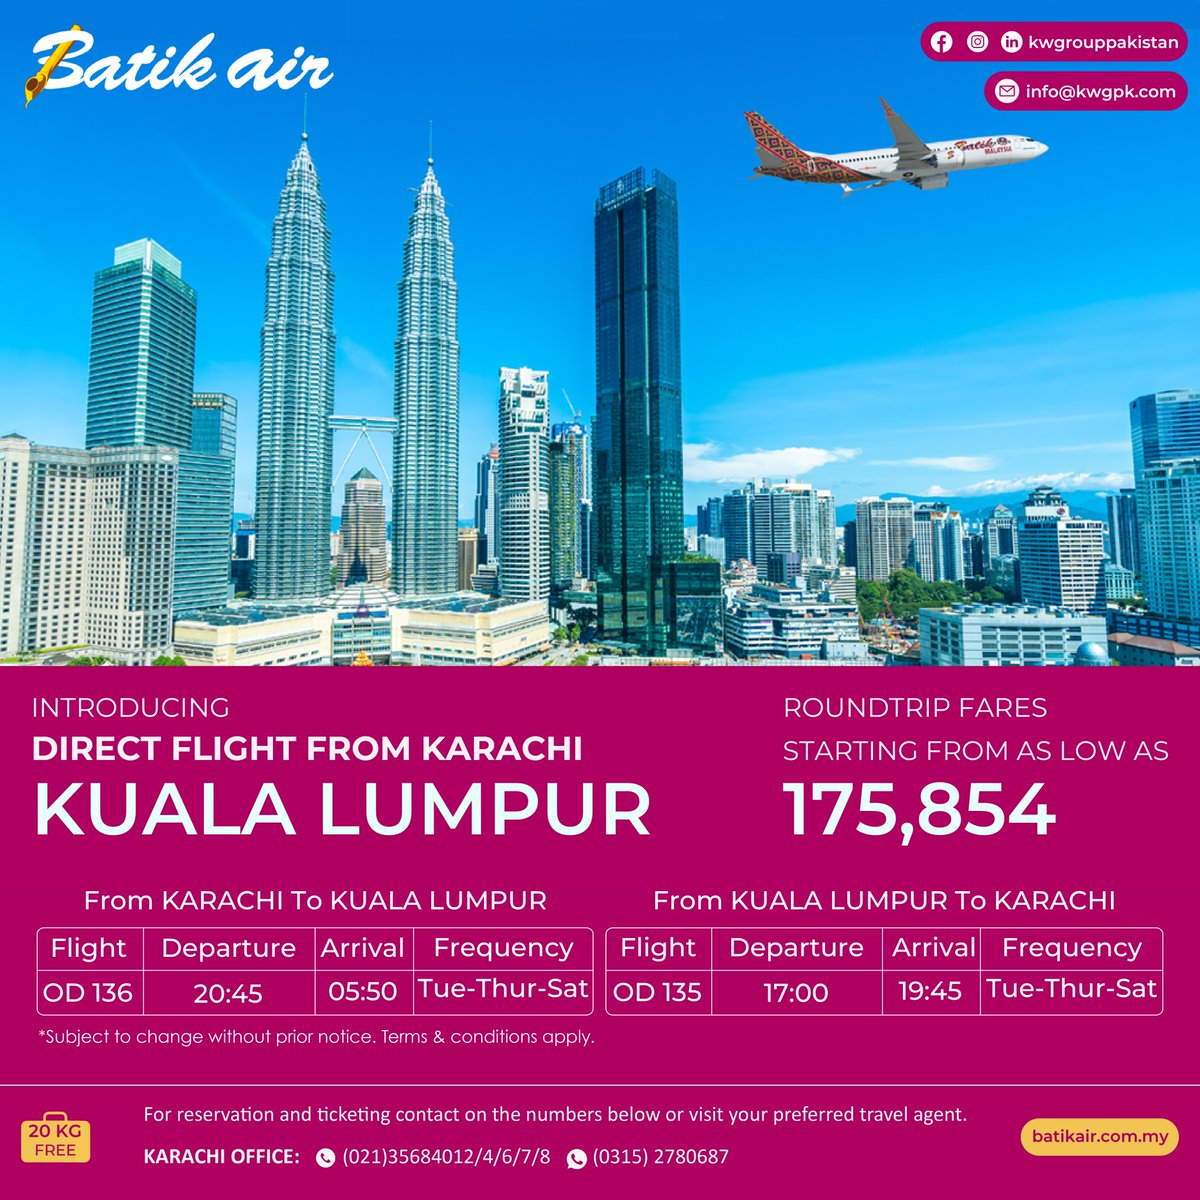 Secure Your Seat! #Karachi to #Kualalumpur , Non-Stop Flight Takes Off November 4th. Book Now and Soar High! 🛫🌟 #TravelDreams #FlyNonStop #adventureawaits
@KWGroupPakistan  is the GSA of @malindoair  in Pakistan.